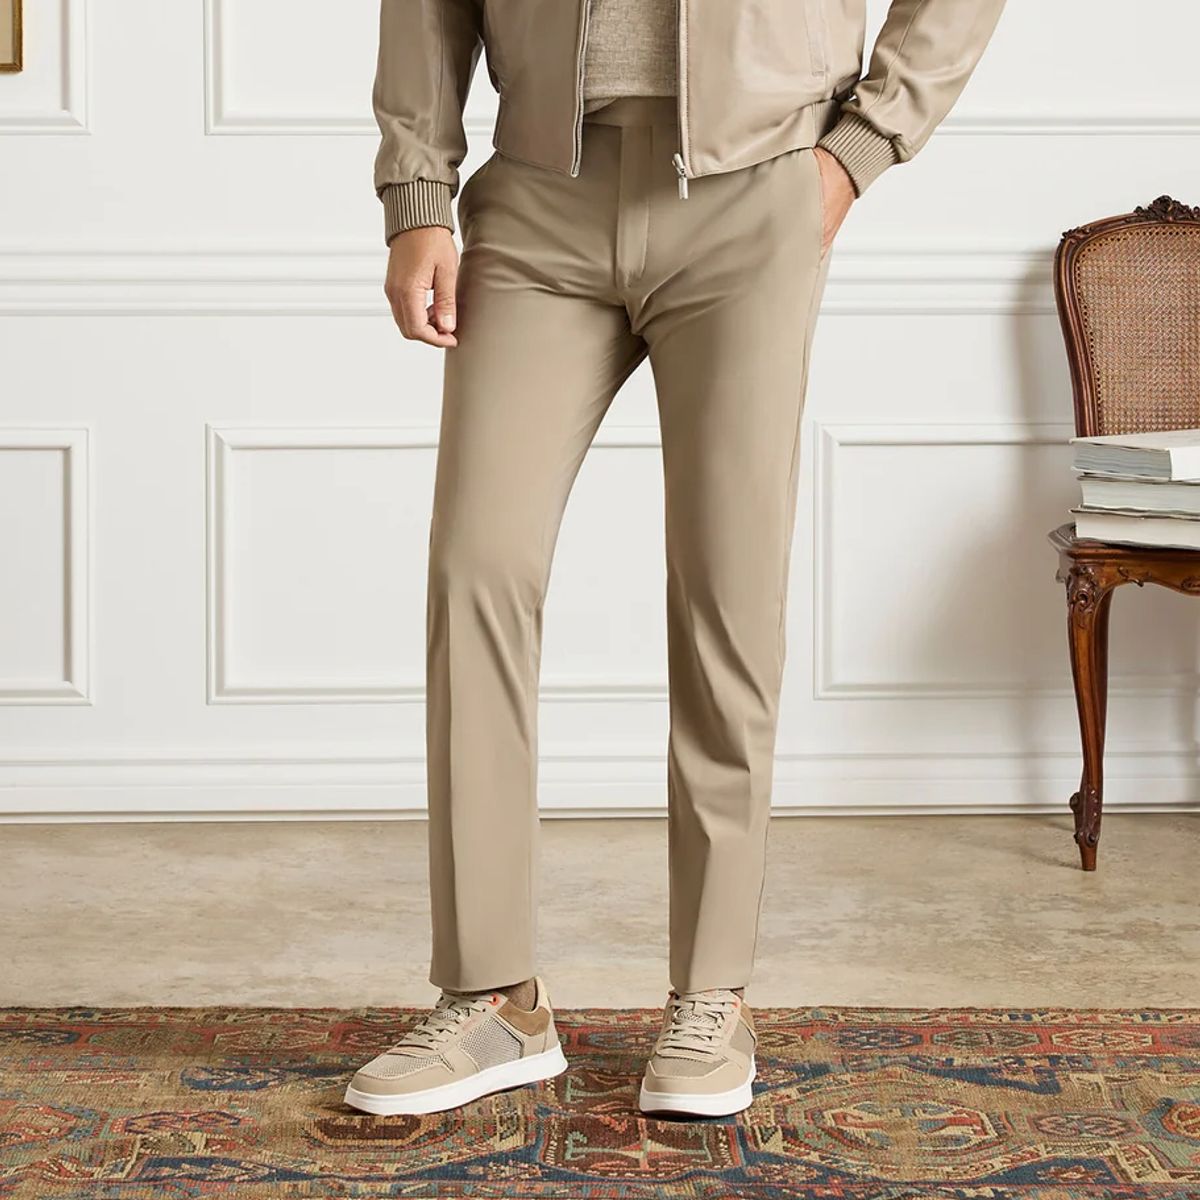 Noah Active Trousers in Tan (Trim Tapered Fit) by Zanella